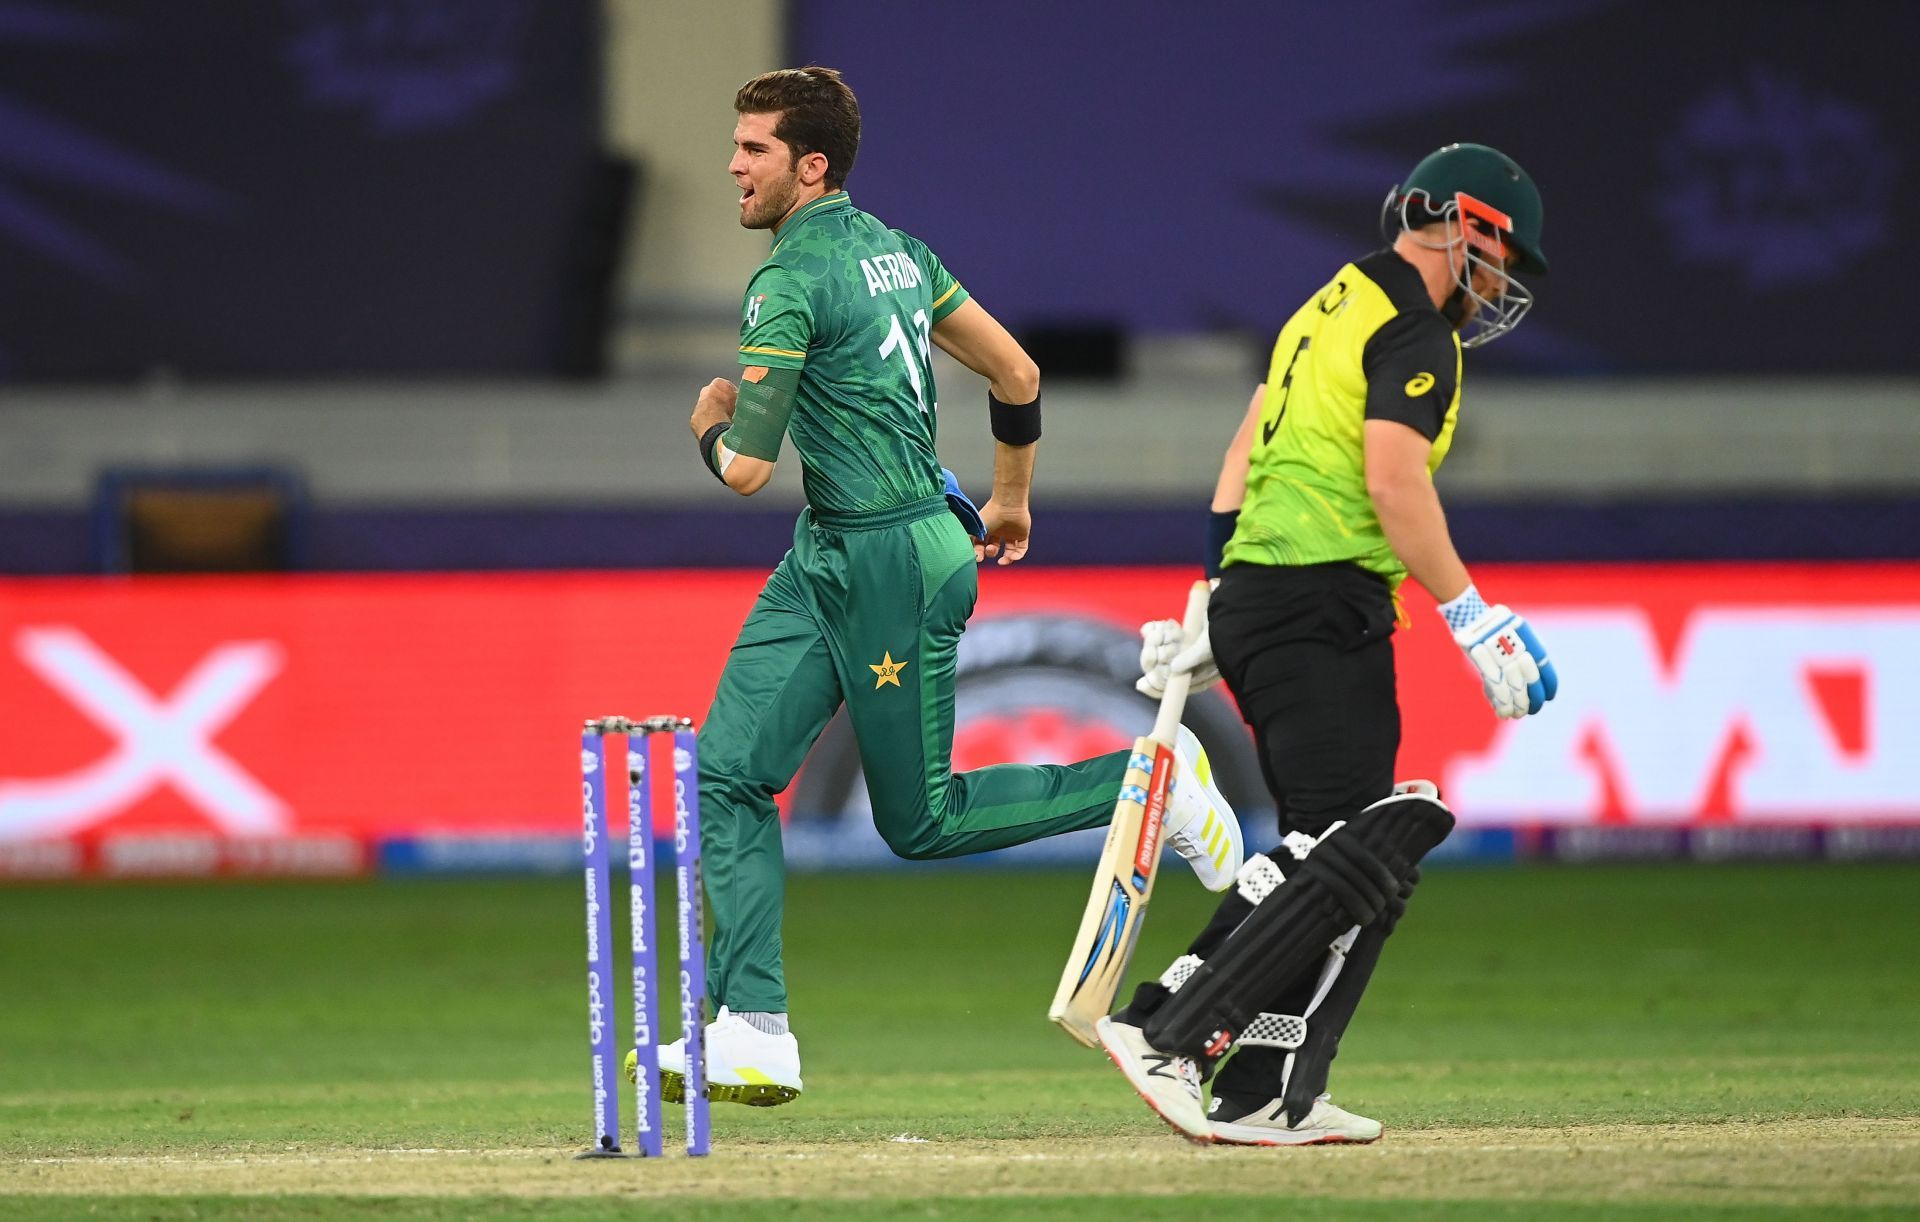 Shaheen Afridi has grown into becoming a premier fast bowler for Pakistan.